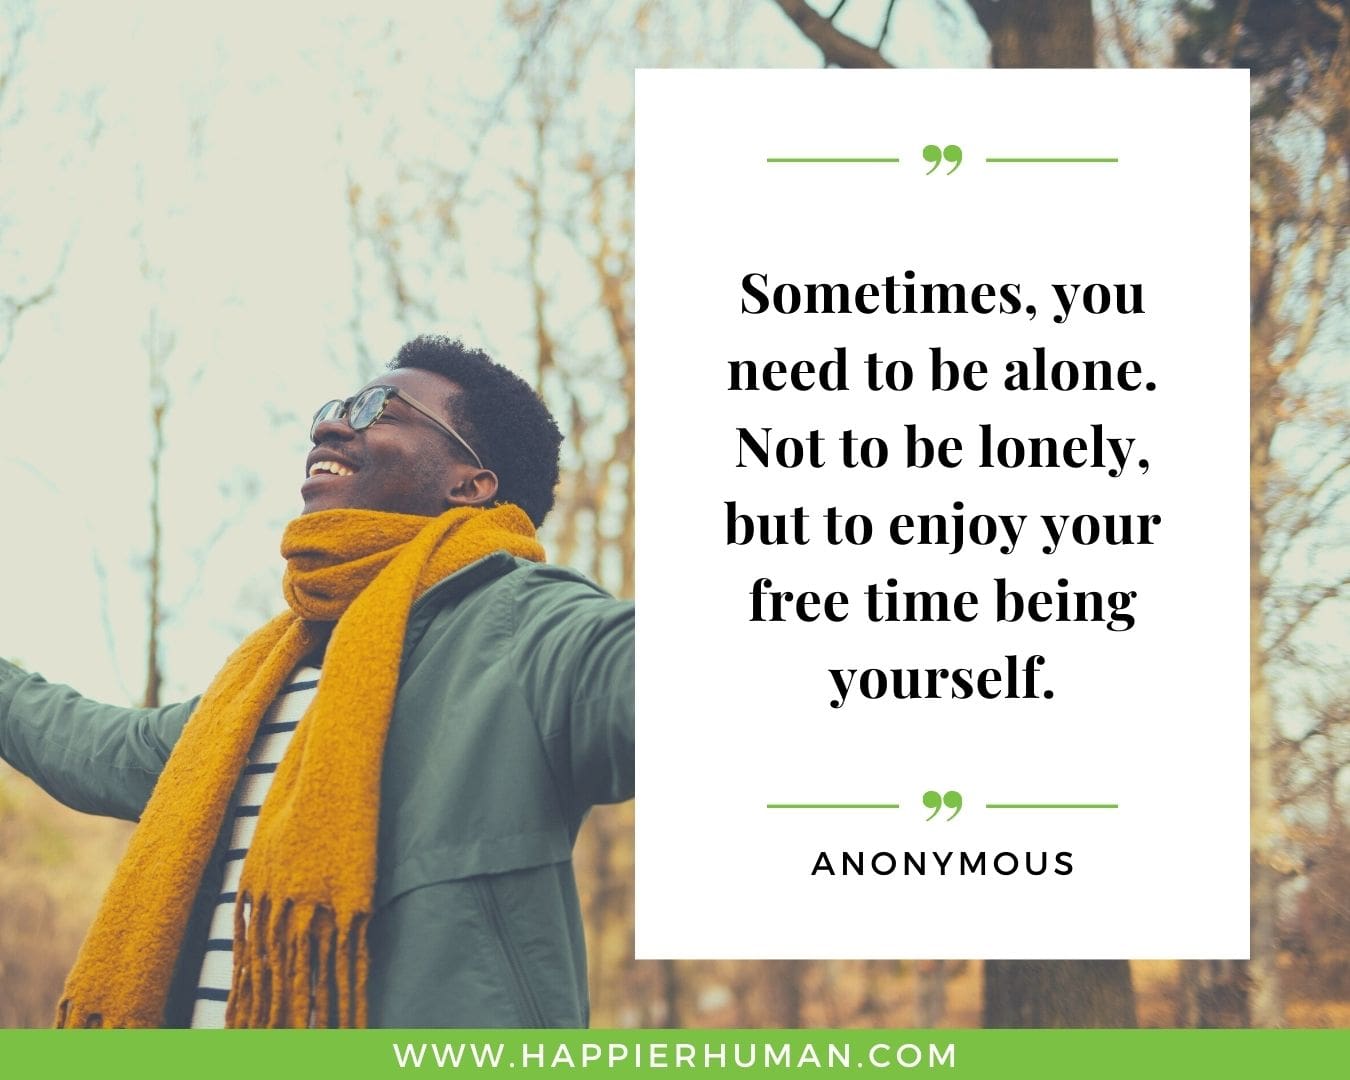 Loneliness Quotes - “Sometimes, you need to be alone. Not to be lonely, but to enjoy your free time being yourself.” .”– Anonymous